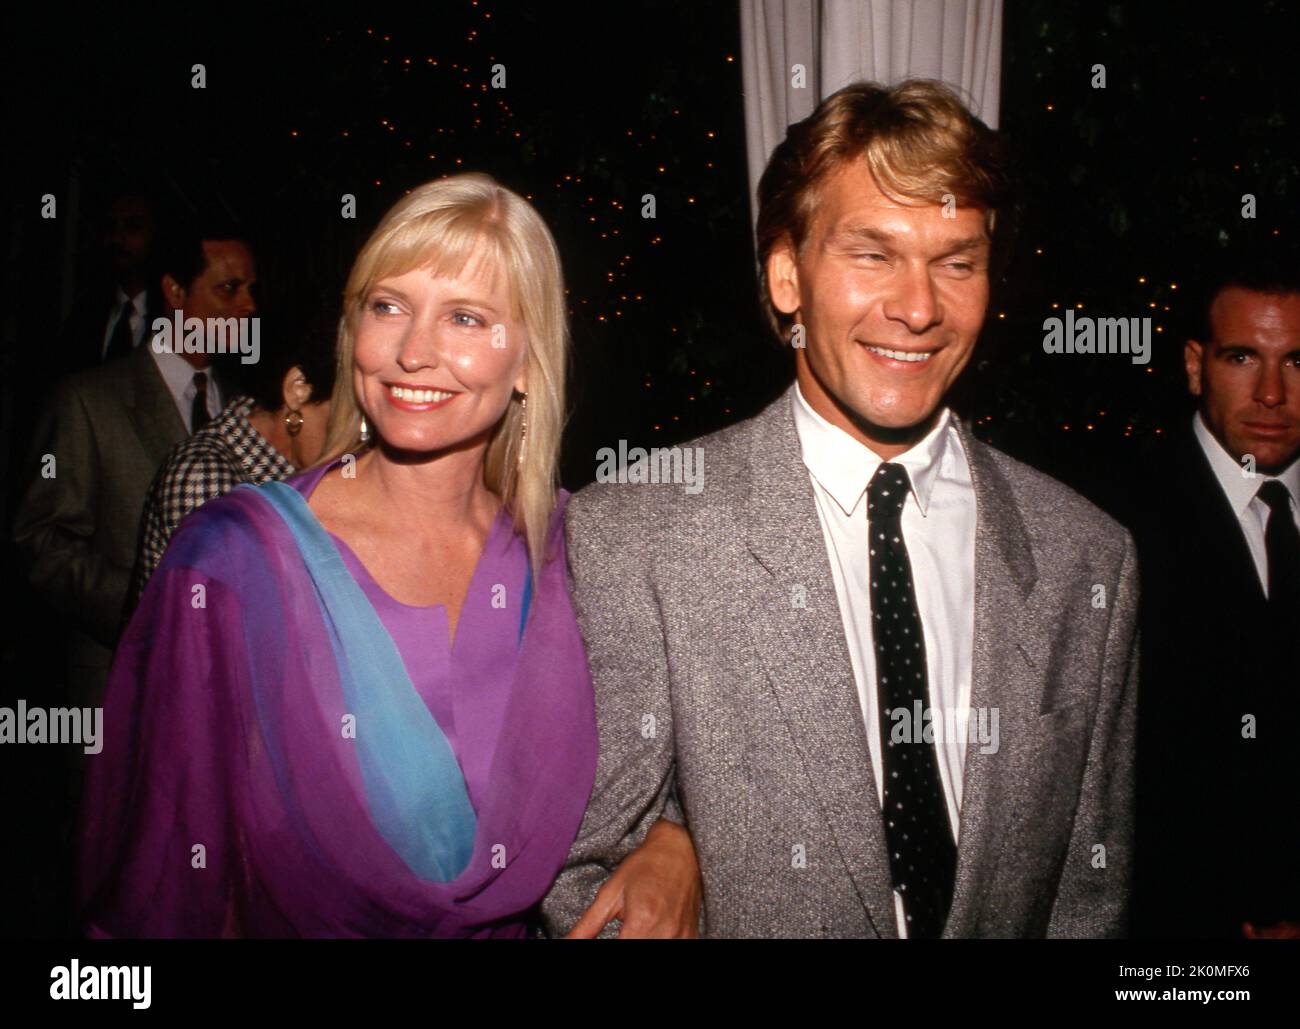 Patrick Swayze And Wife Lisa Niemi At The Premiere Of Robin Hood On June 10 1991 At Mann 